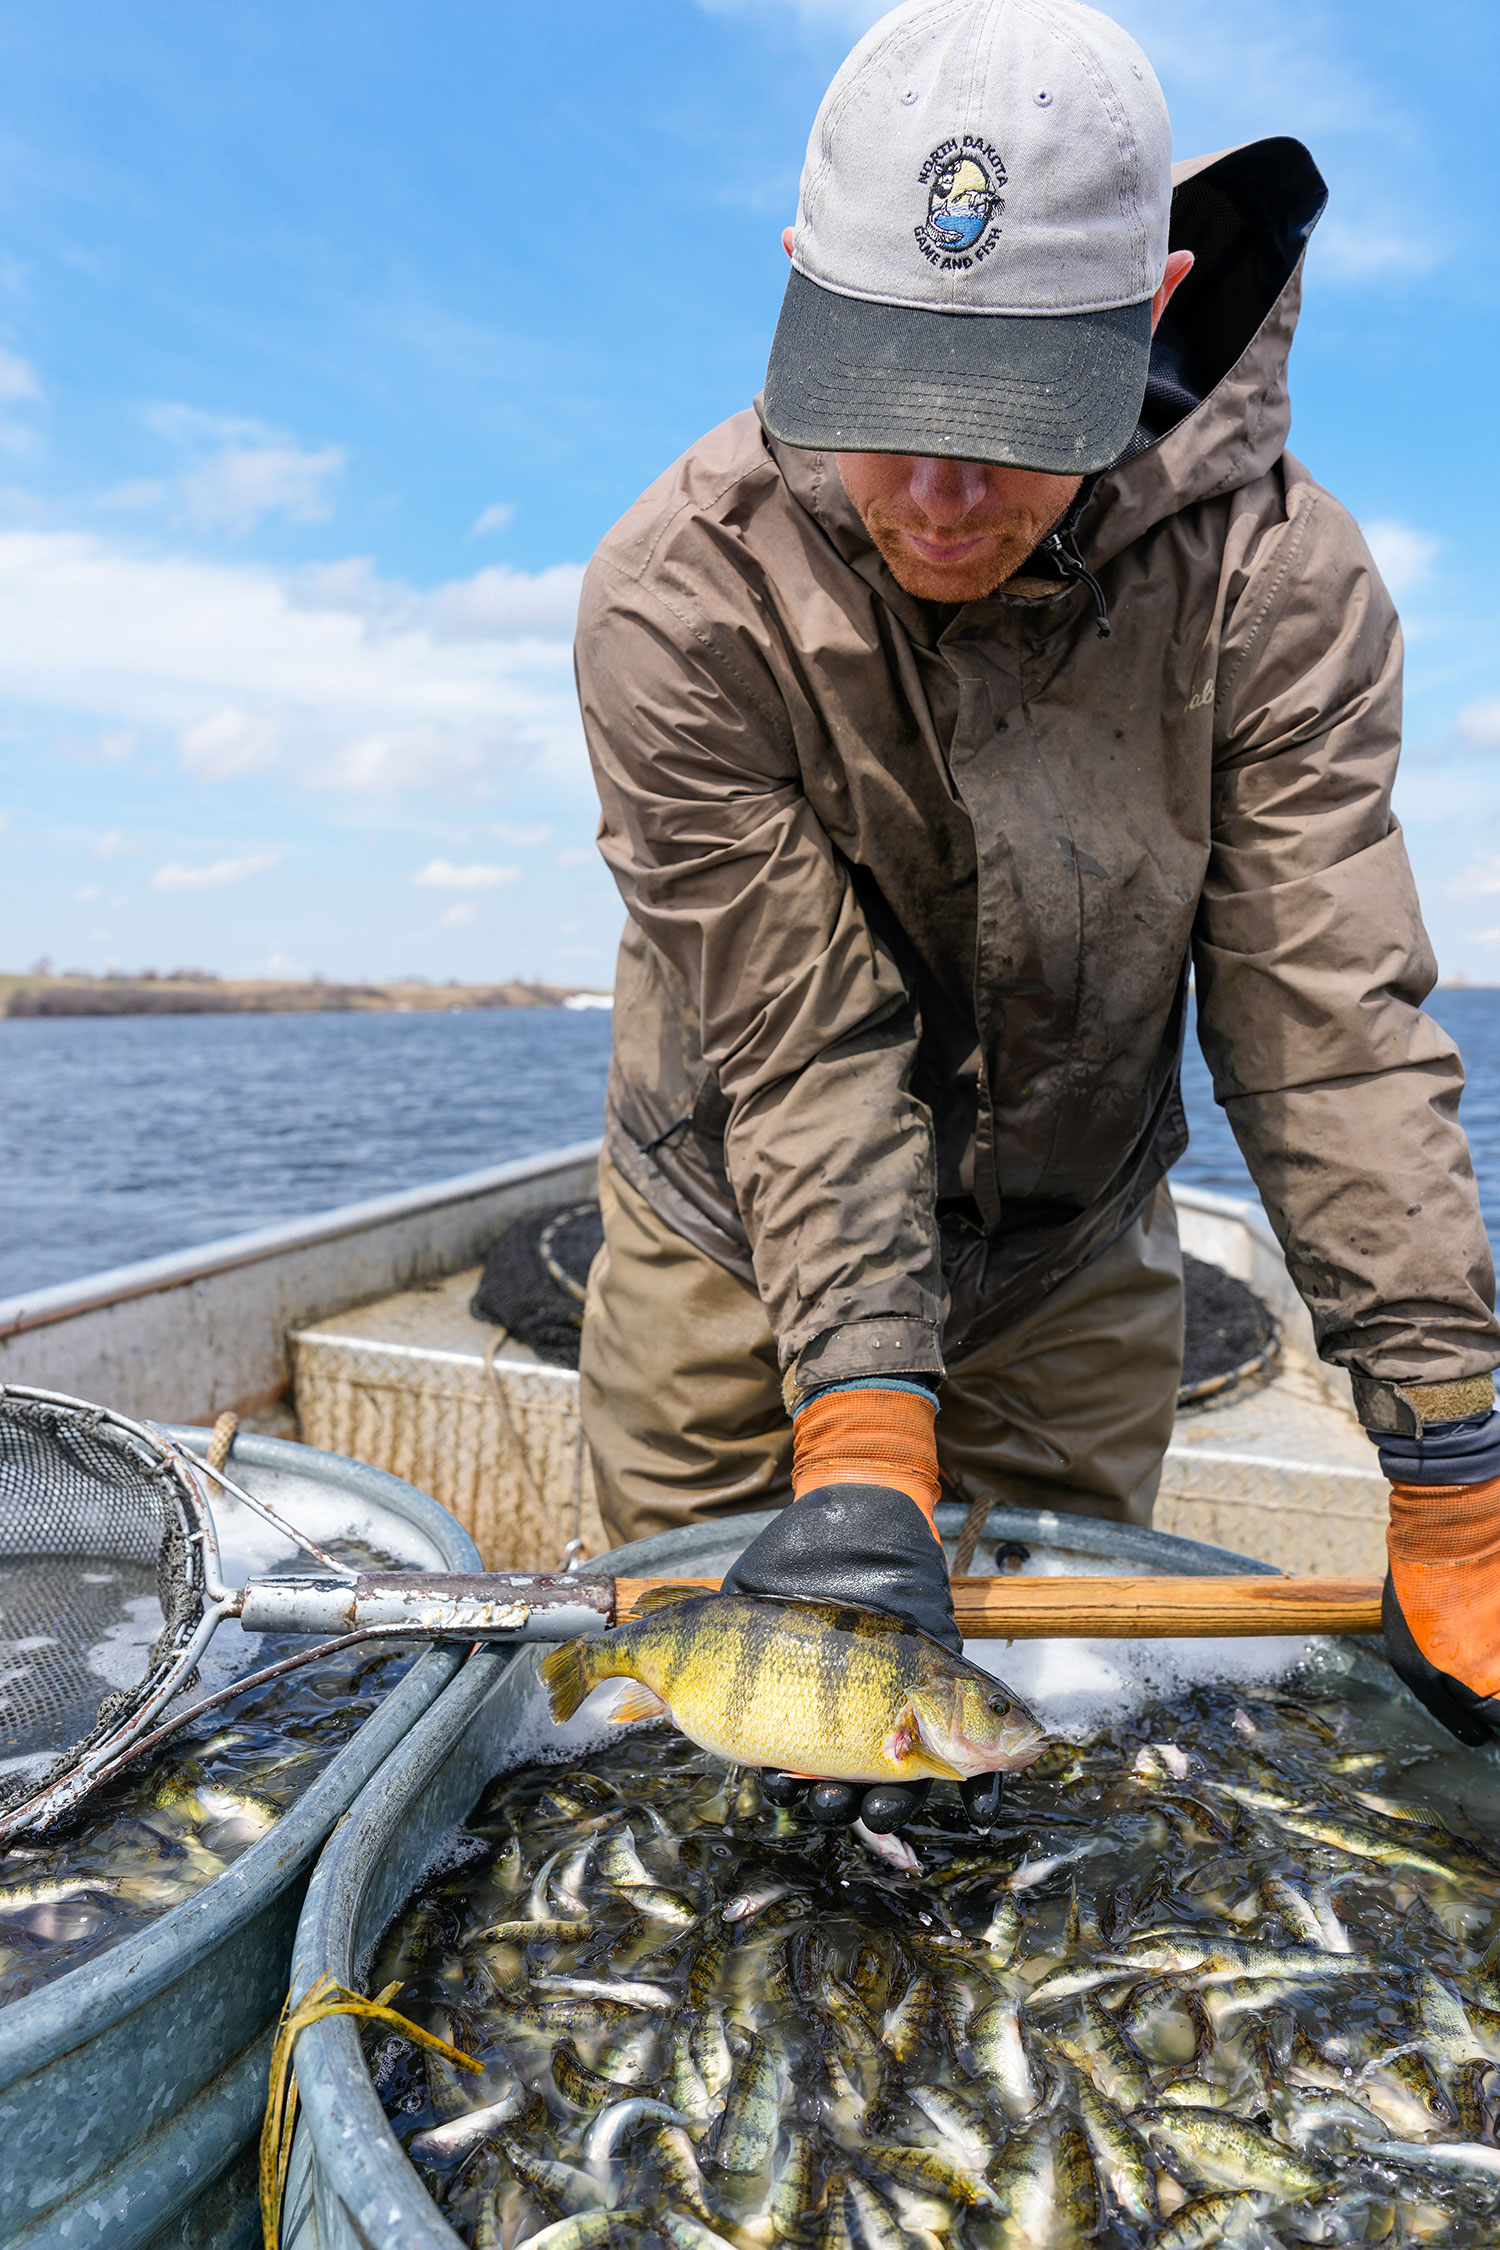 Fisheries biologist holding perch above fish holding tank on boat